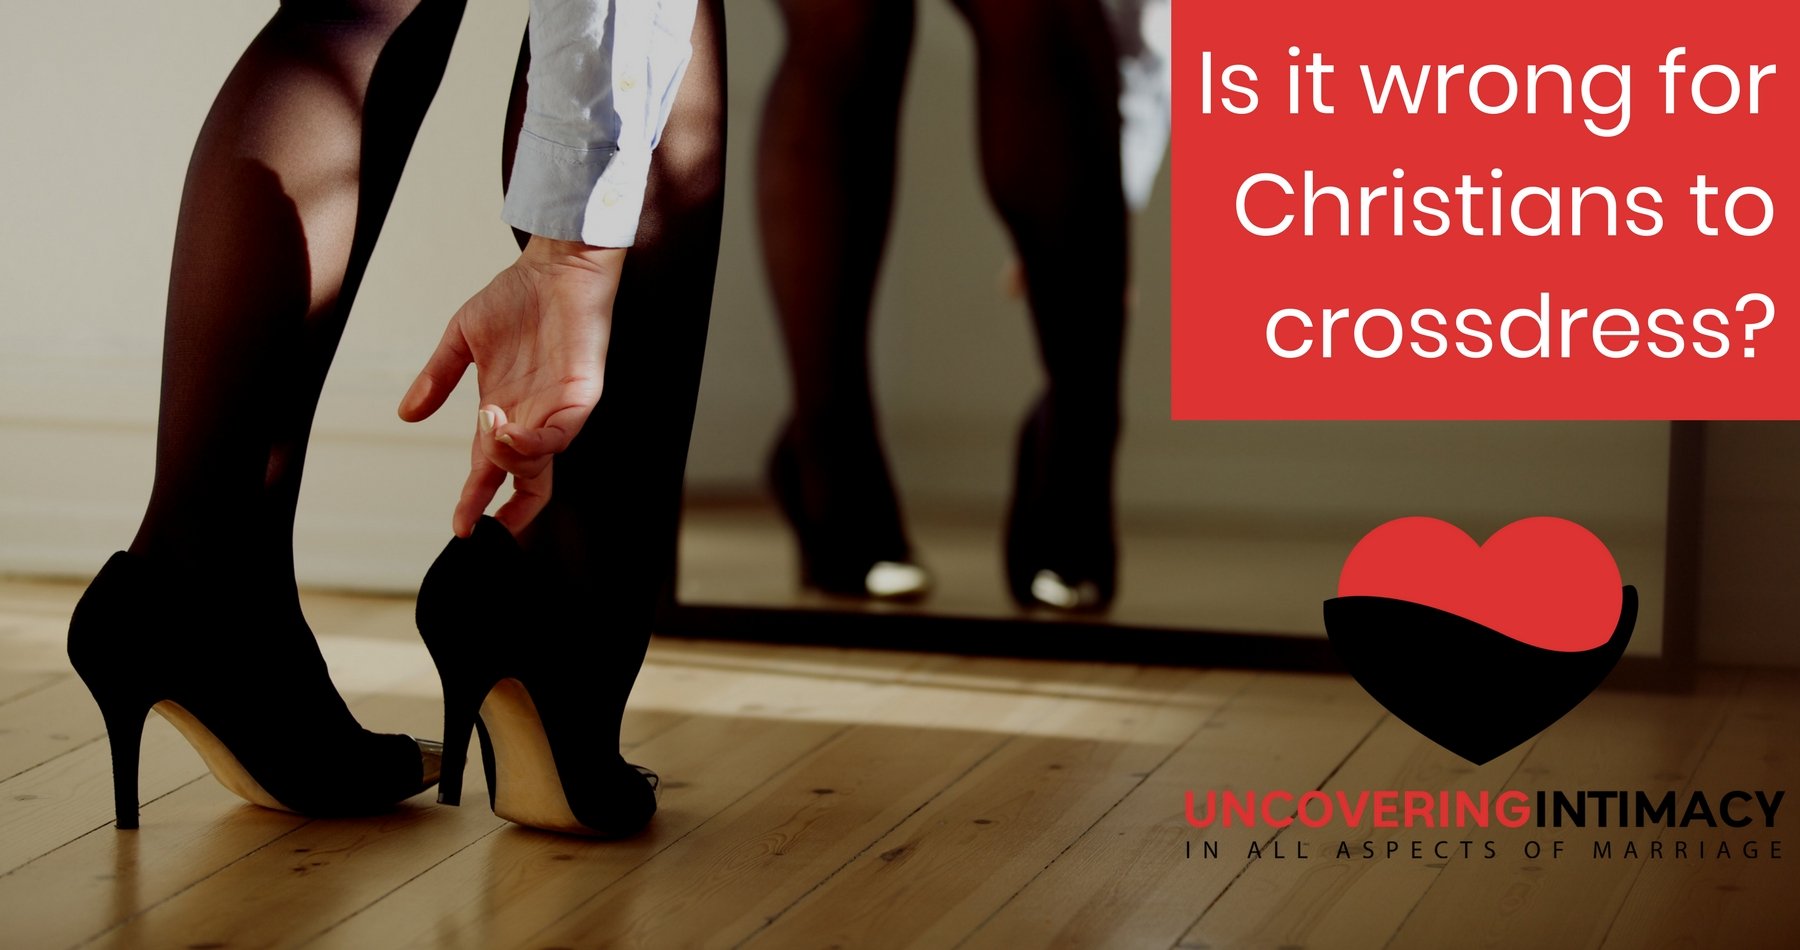 Is it wrong for Christians to crossdress? pic